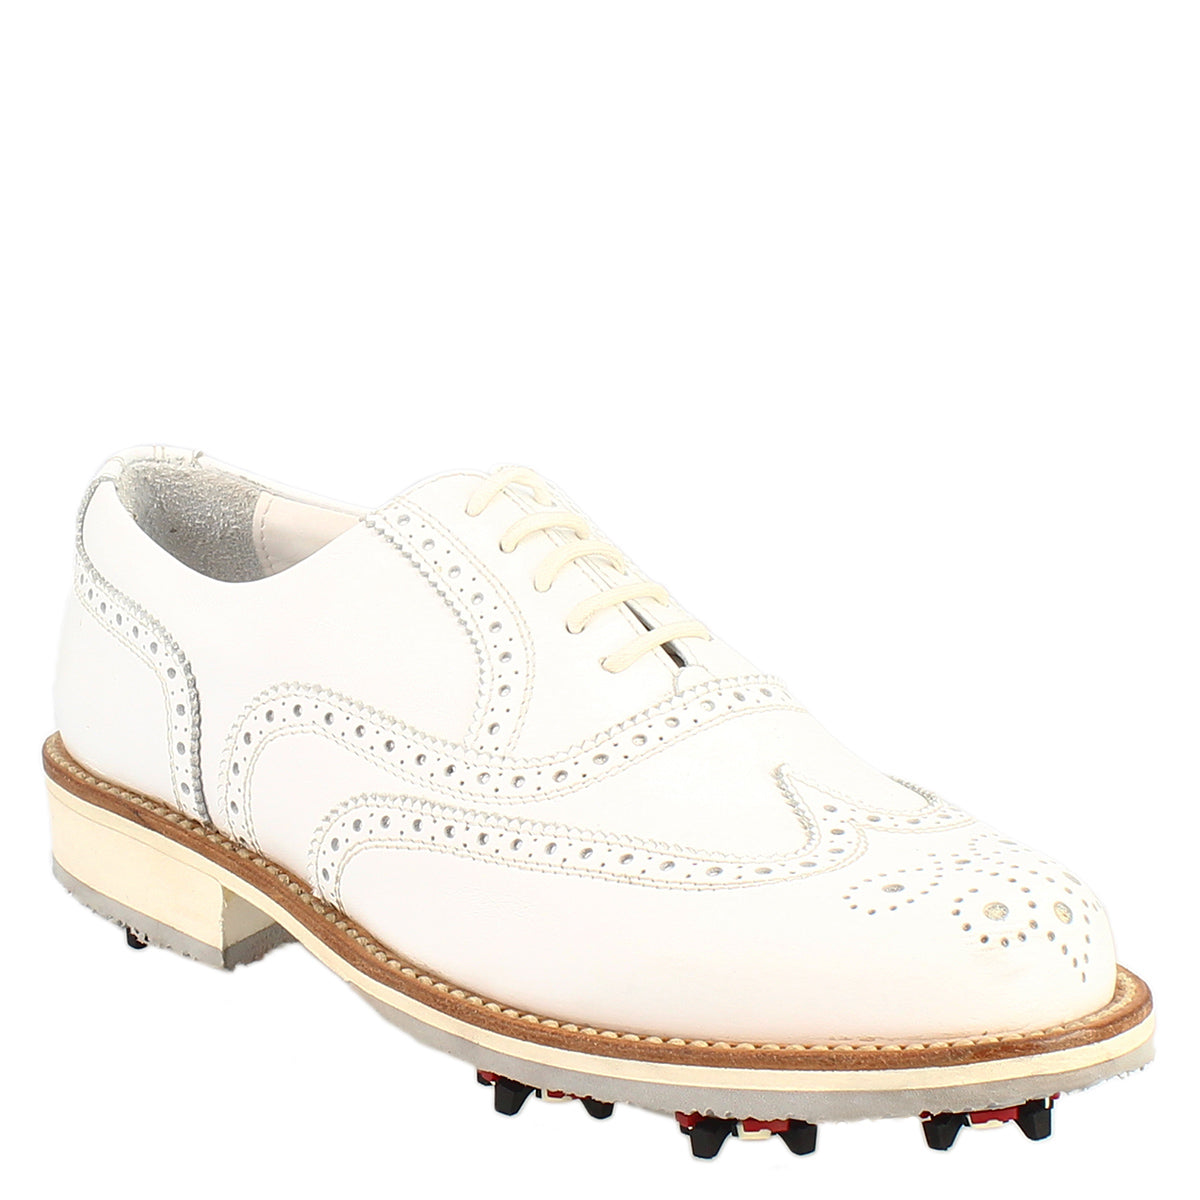 Women's classic brogues handcrafted in white leather